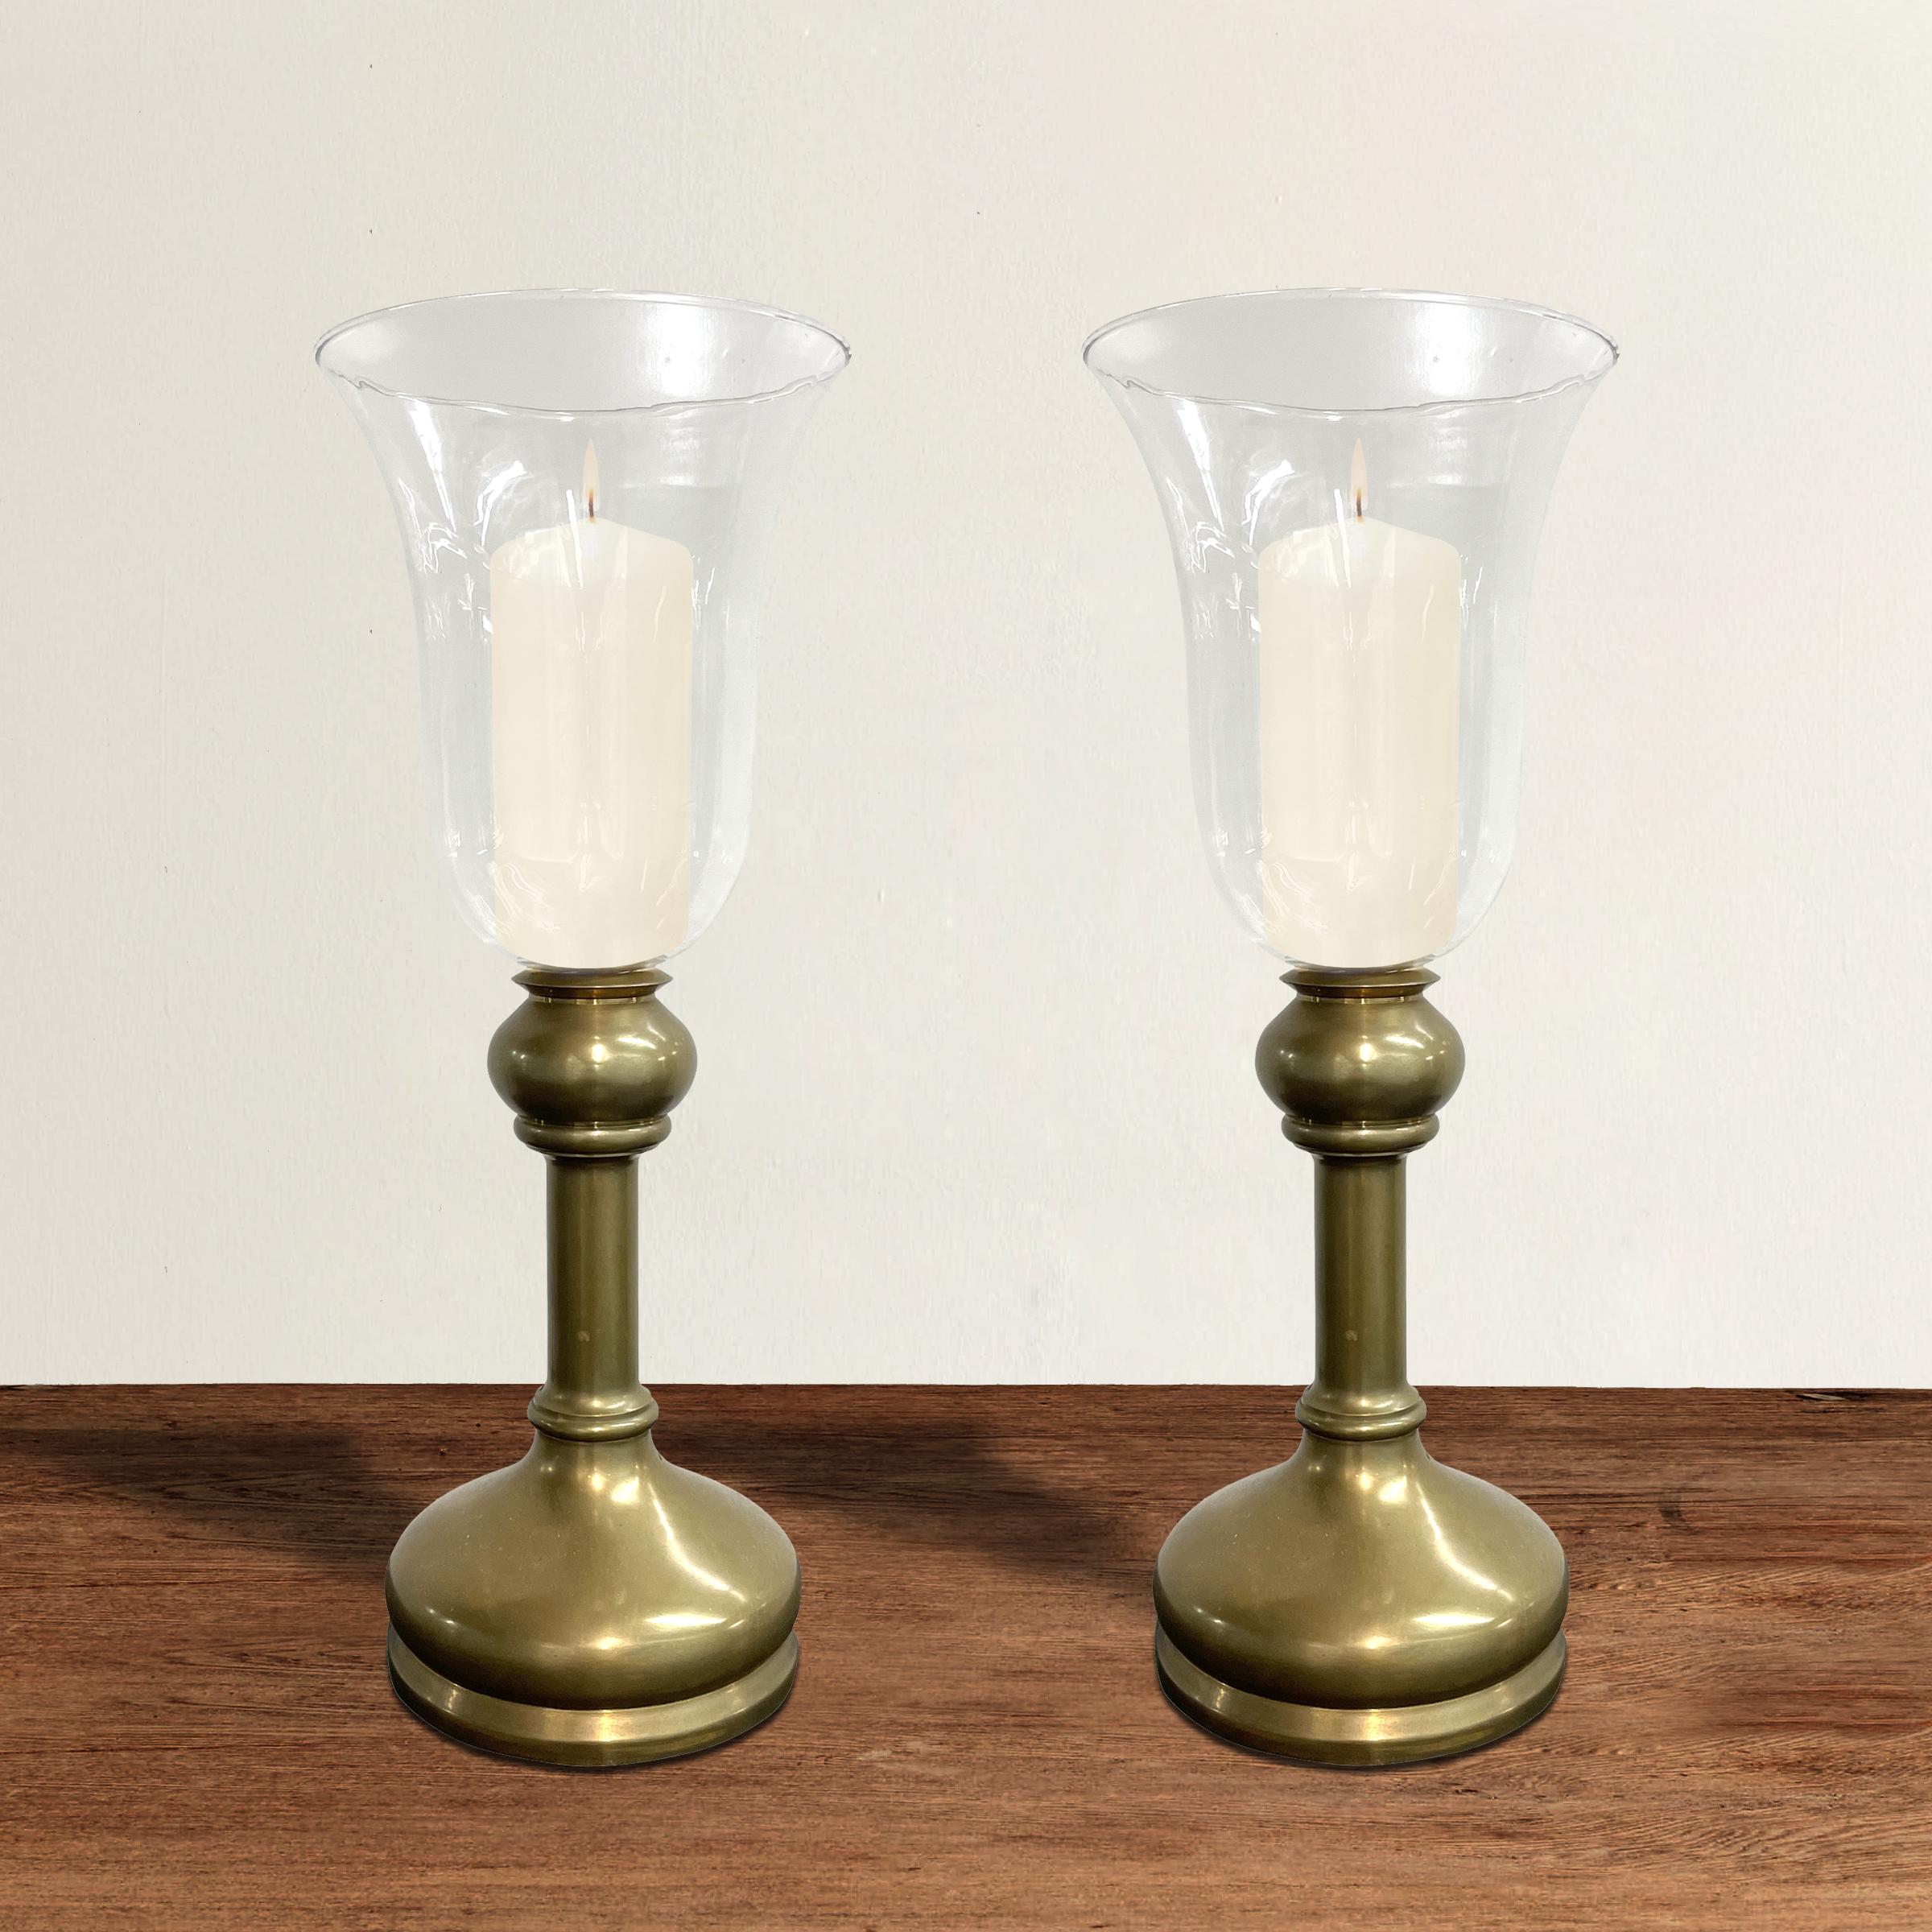 A pair of vintage 20th century heavy brass candlesticks with bell-shape glass hurricanes.